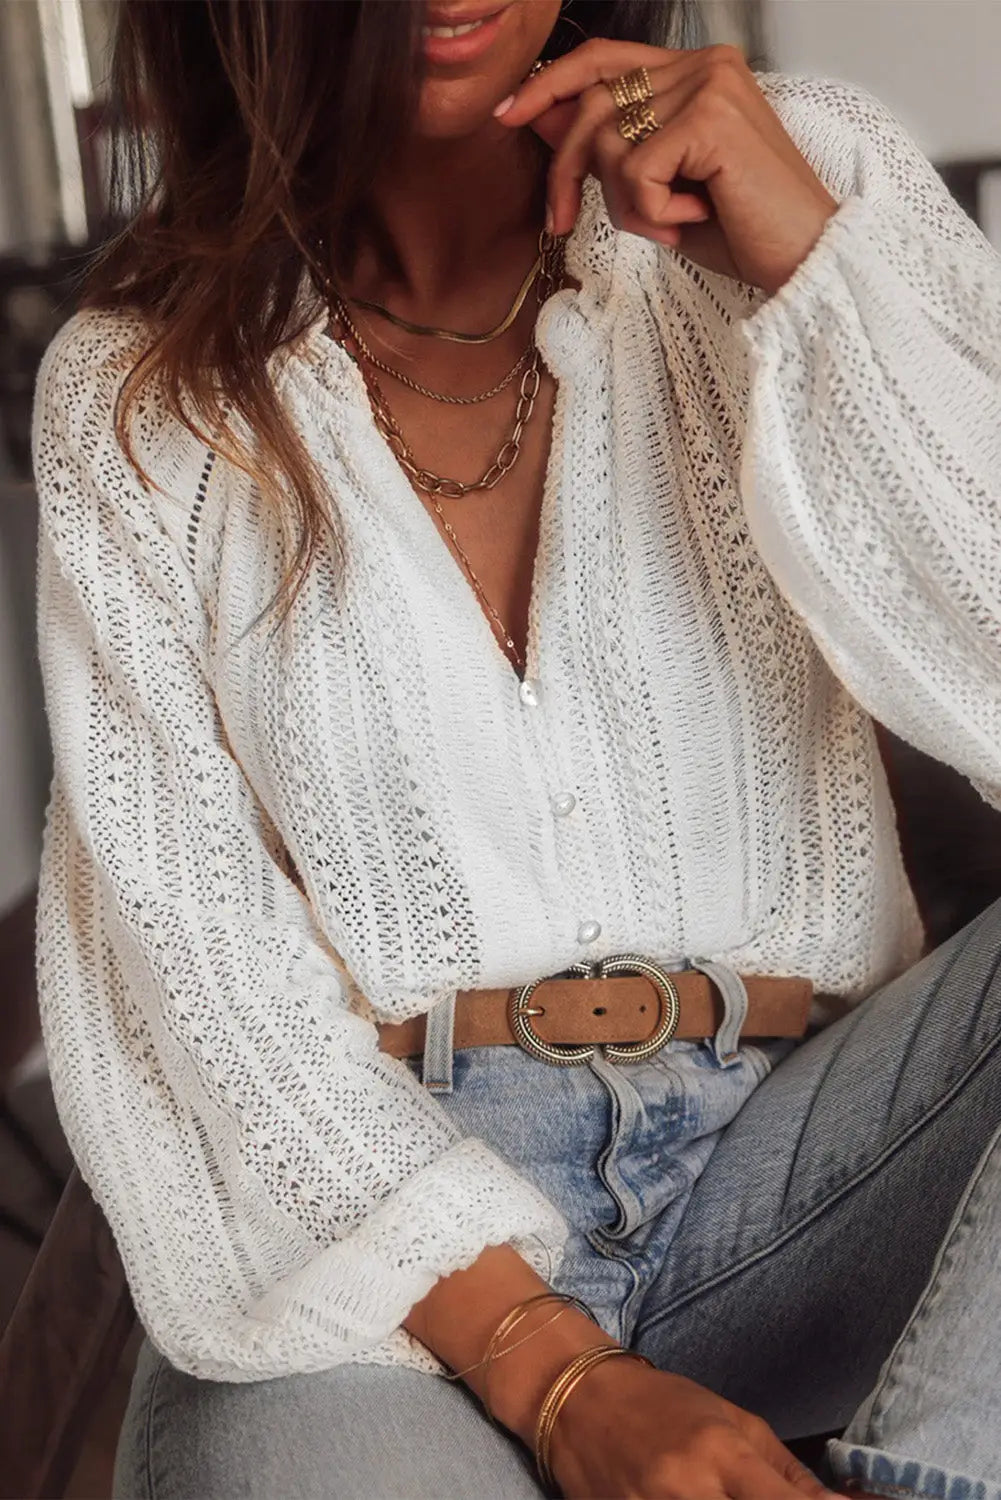 White v-neck long sleeve button up lace shirt - white-2 / s / 85% cotton + 15% polyester - tops